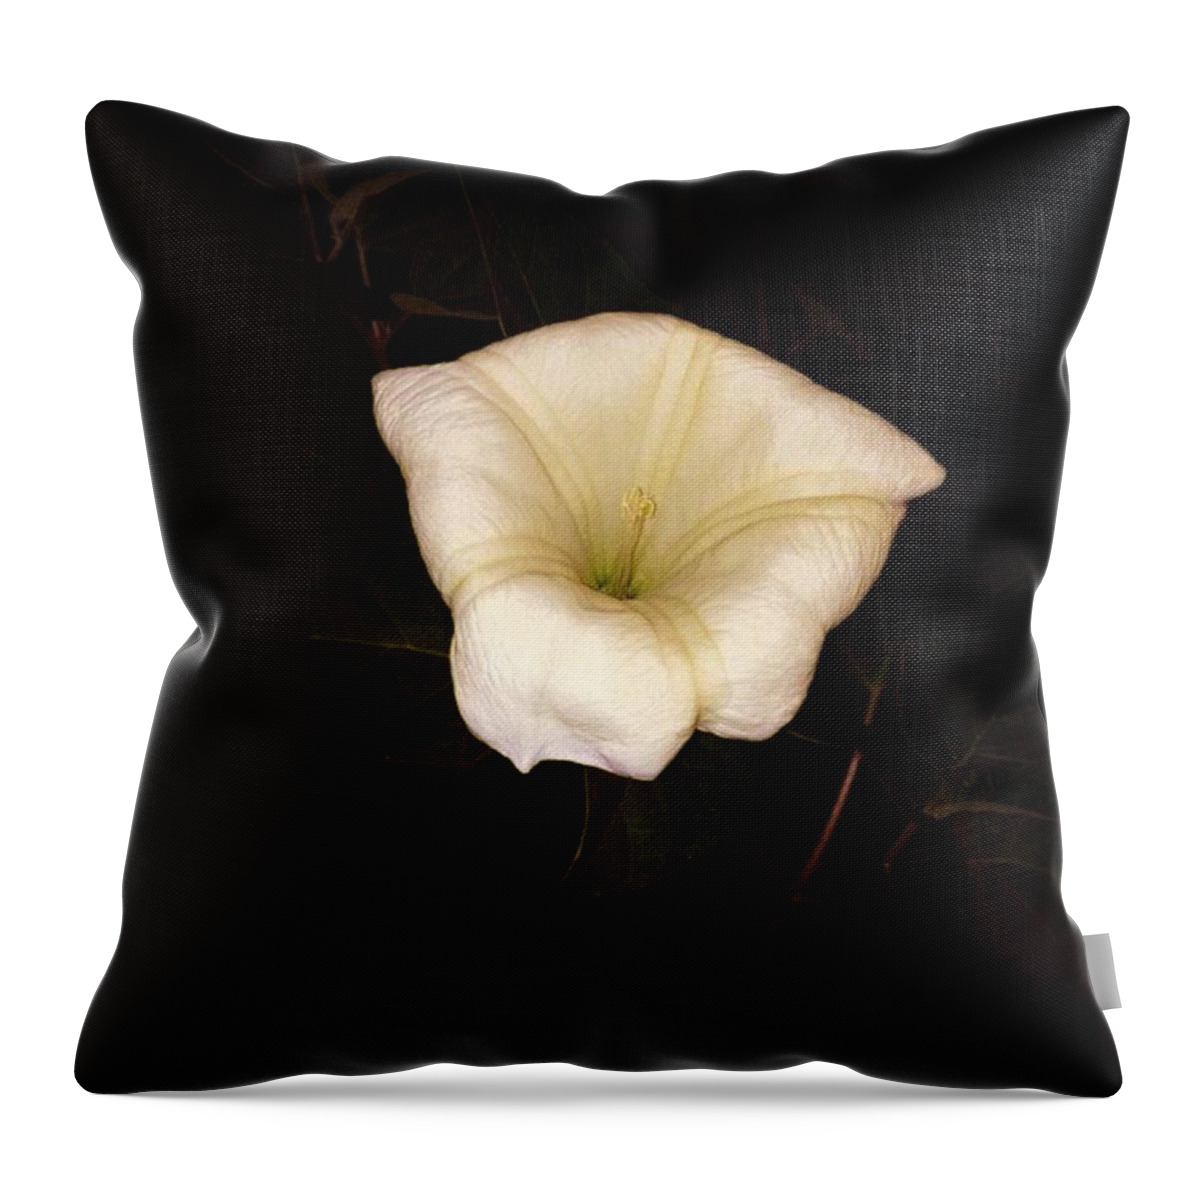 Purity Throw Pillow featuring the photograph Purity Has No Shame by Nick Heap